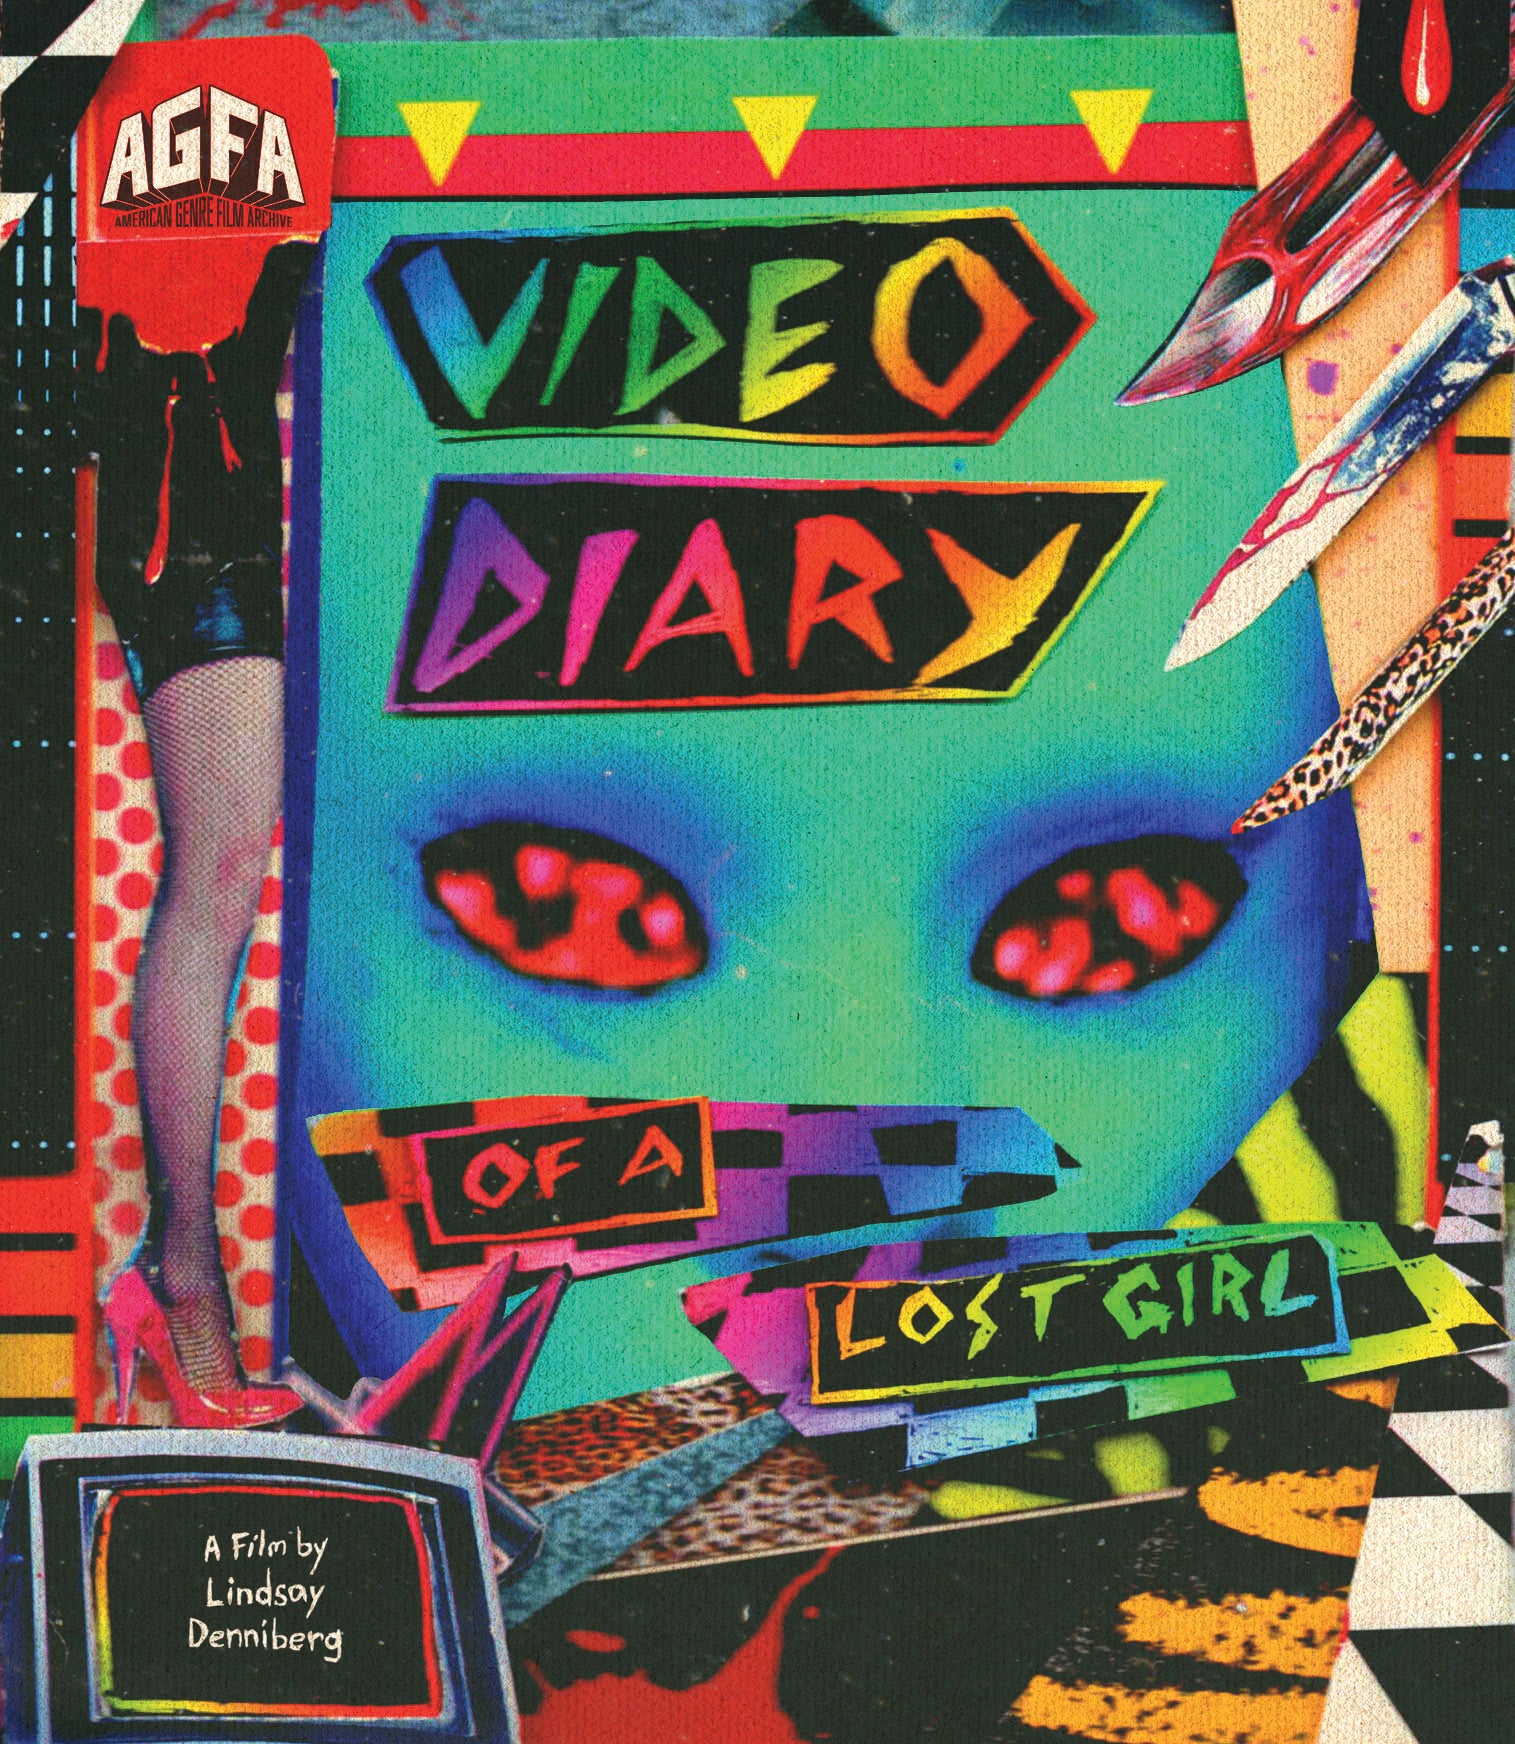 VIDEO DIARY OF A LOST GIRL (LIMITED EDITION) BLU-RAY